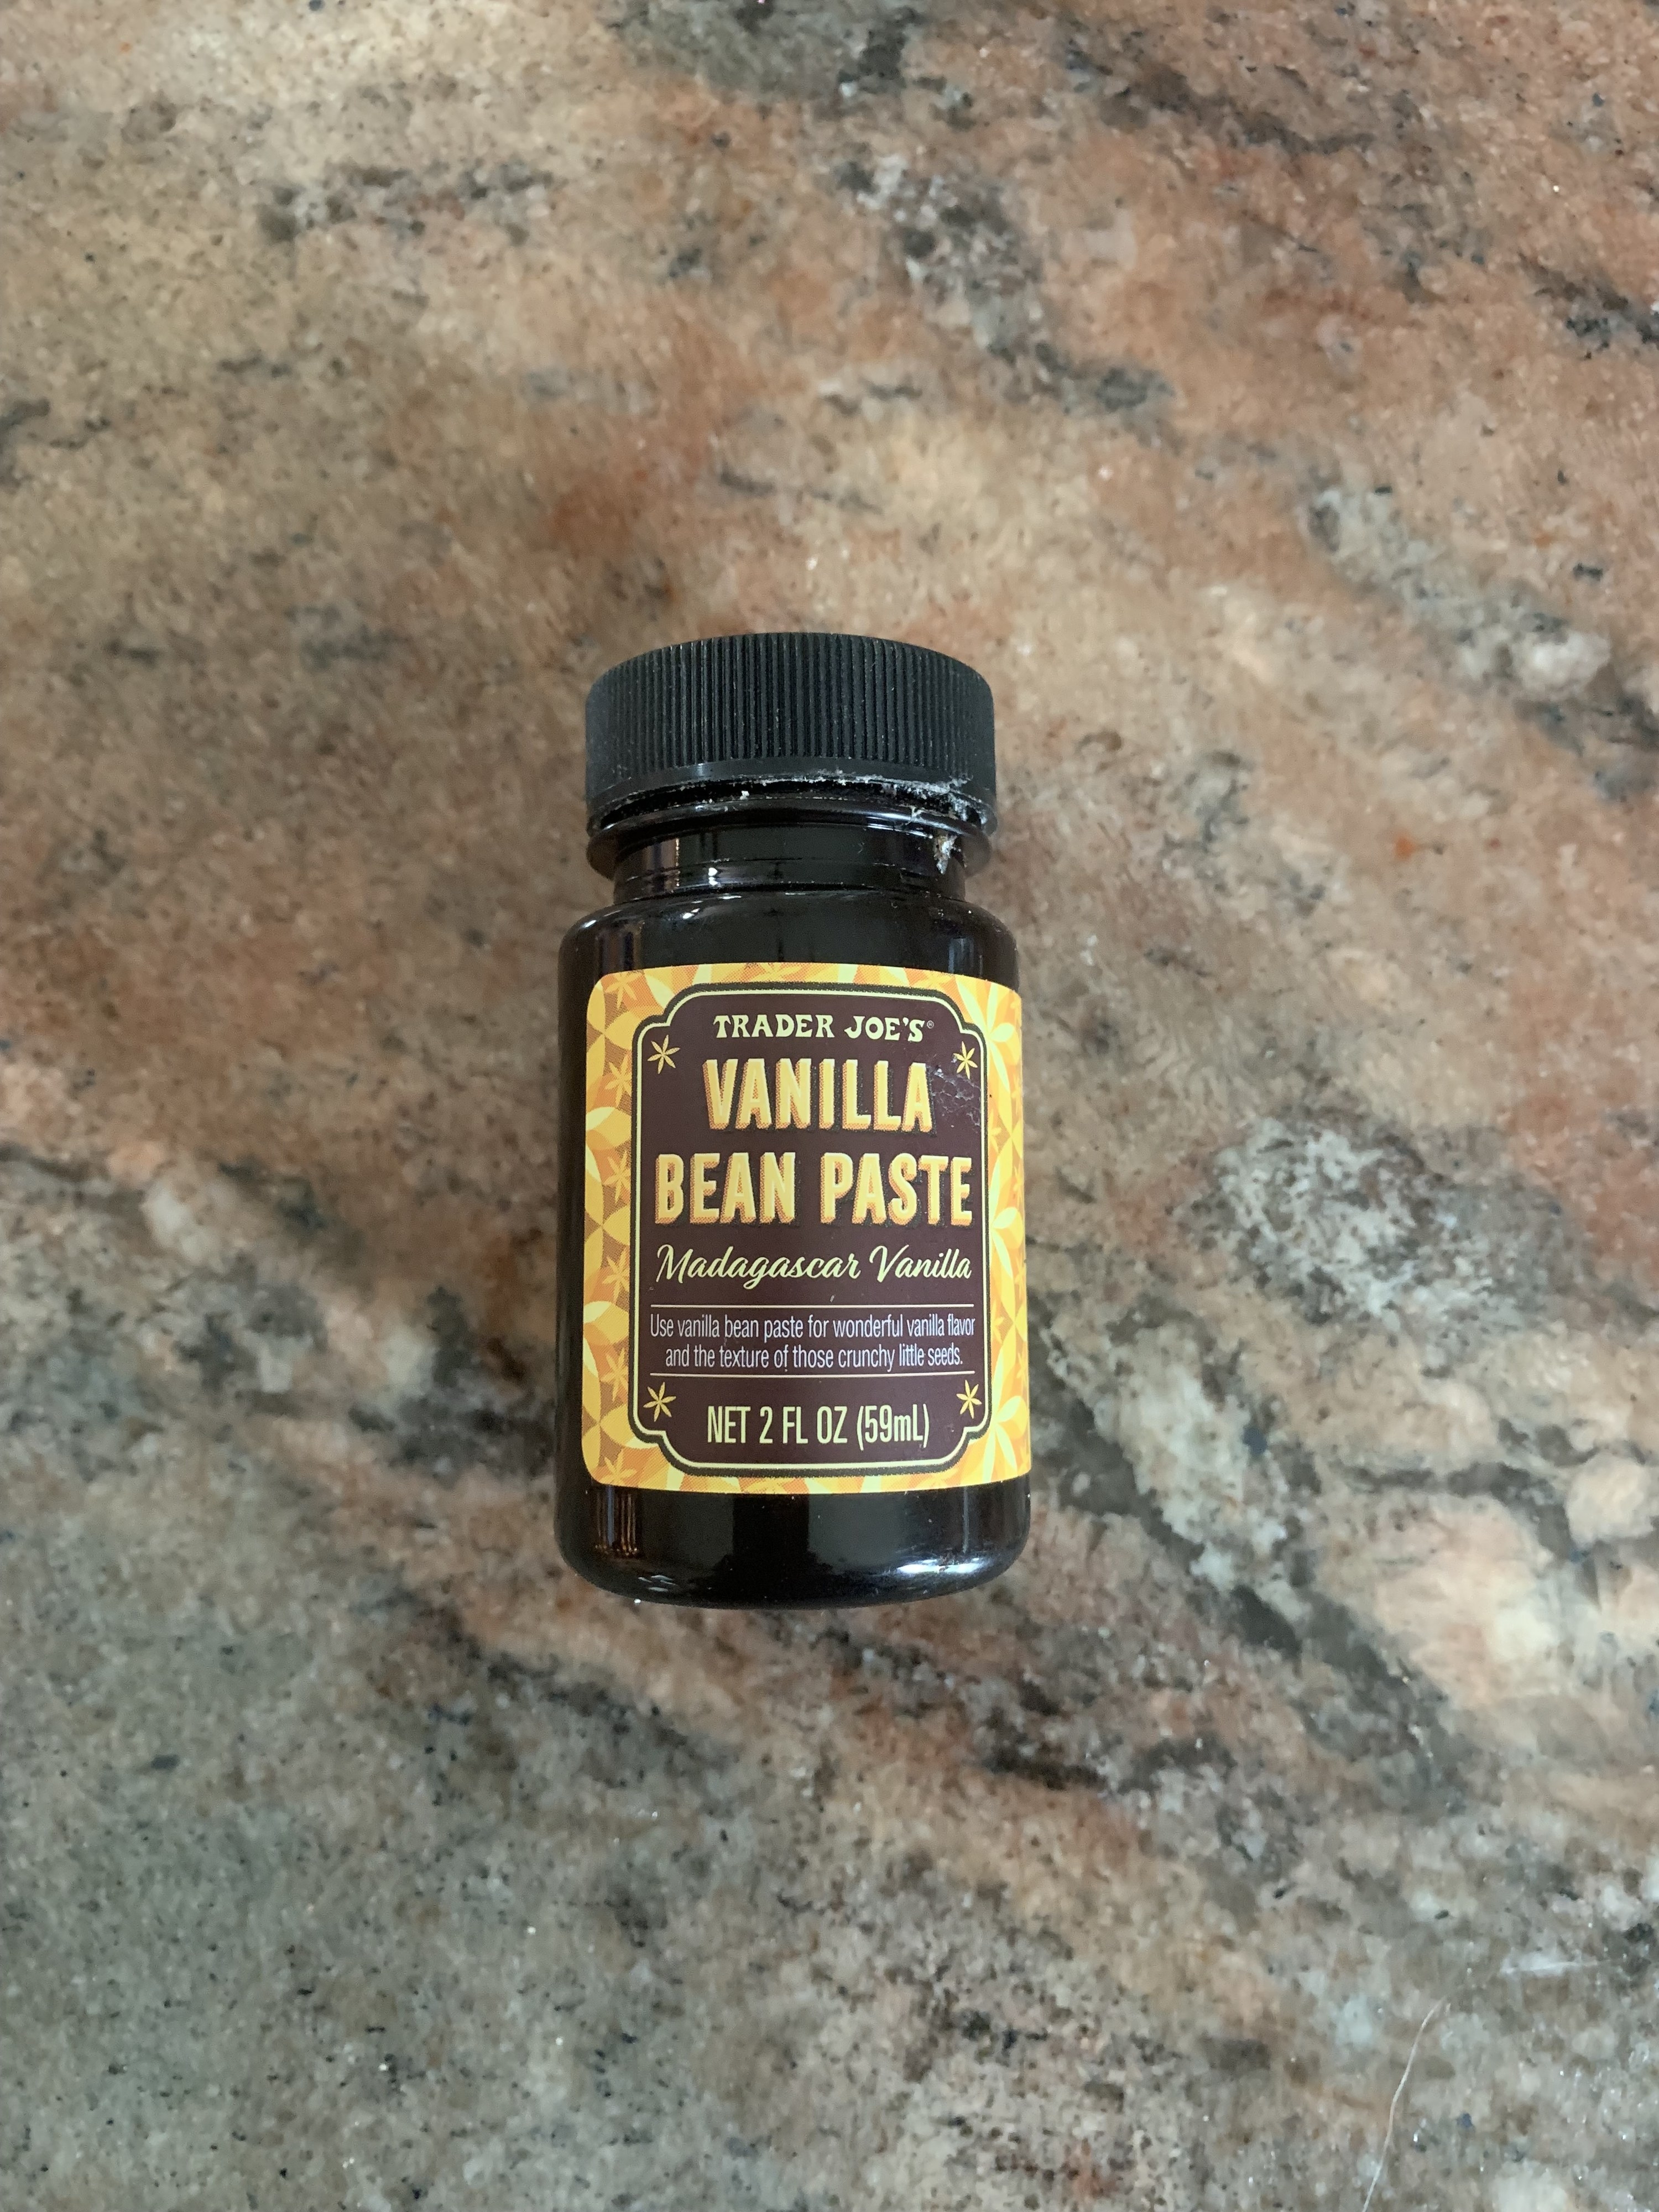 The small bottle of vanilla bean paste laying on the counter